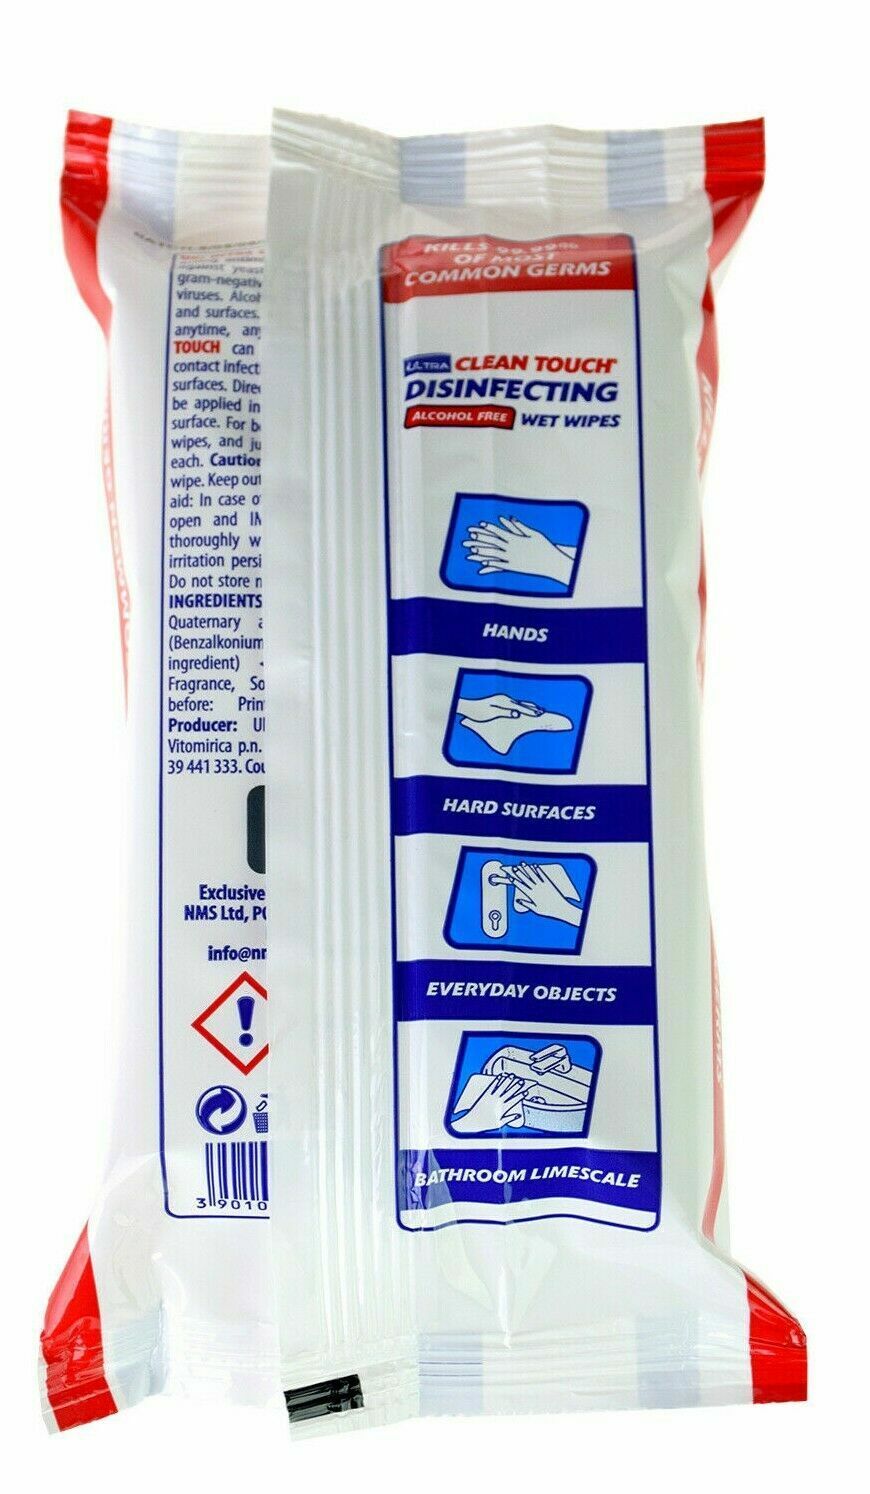 10 x PACKS OF DISINFECTING WET WIPES FOR SURFACES AND HANDS (48 SHEETS PER PACK)